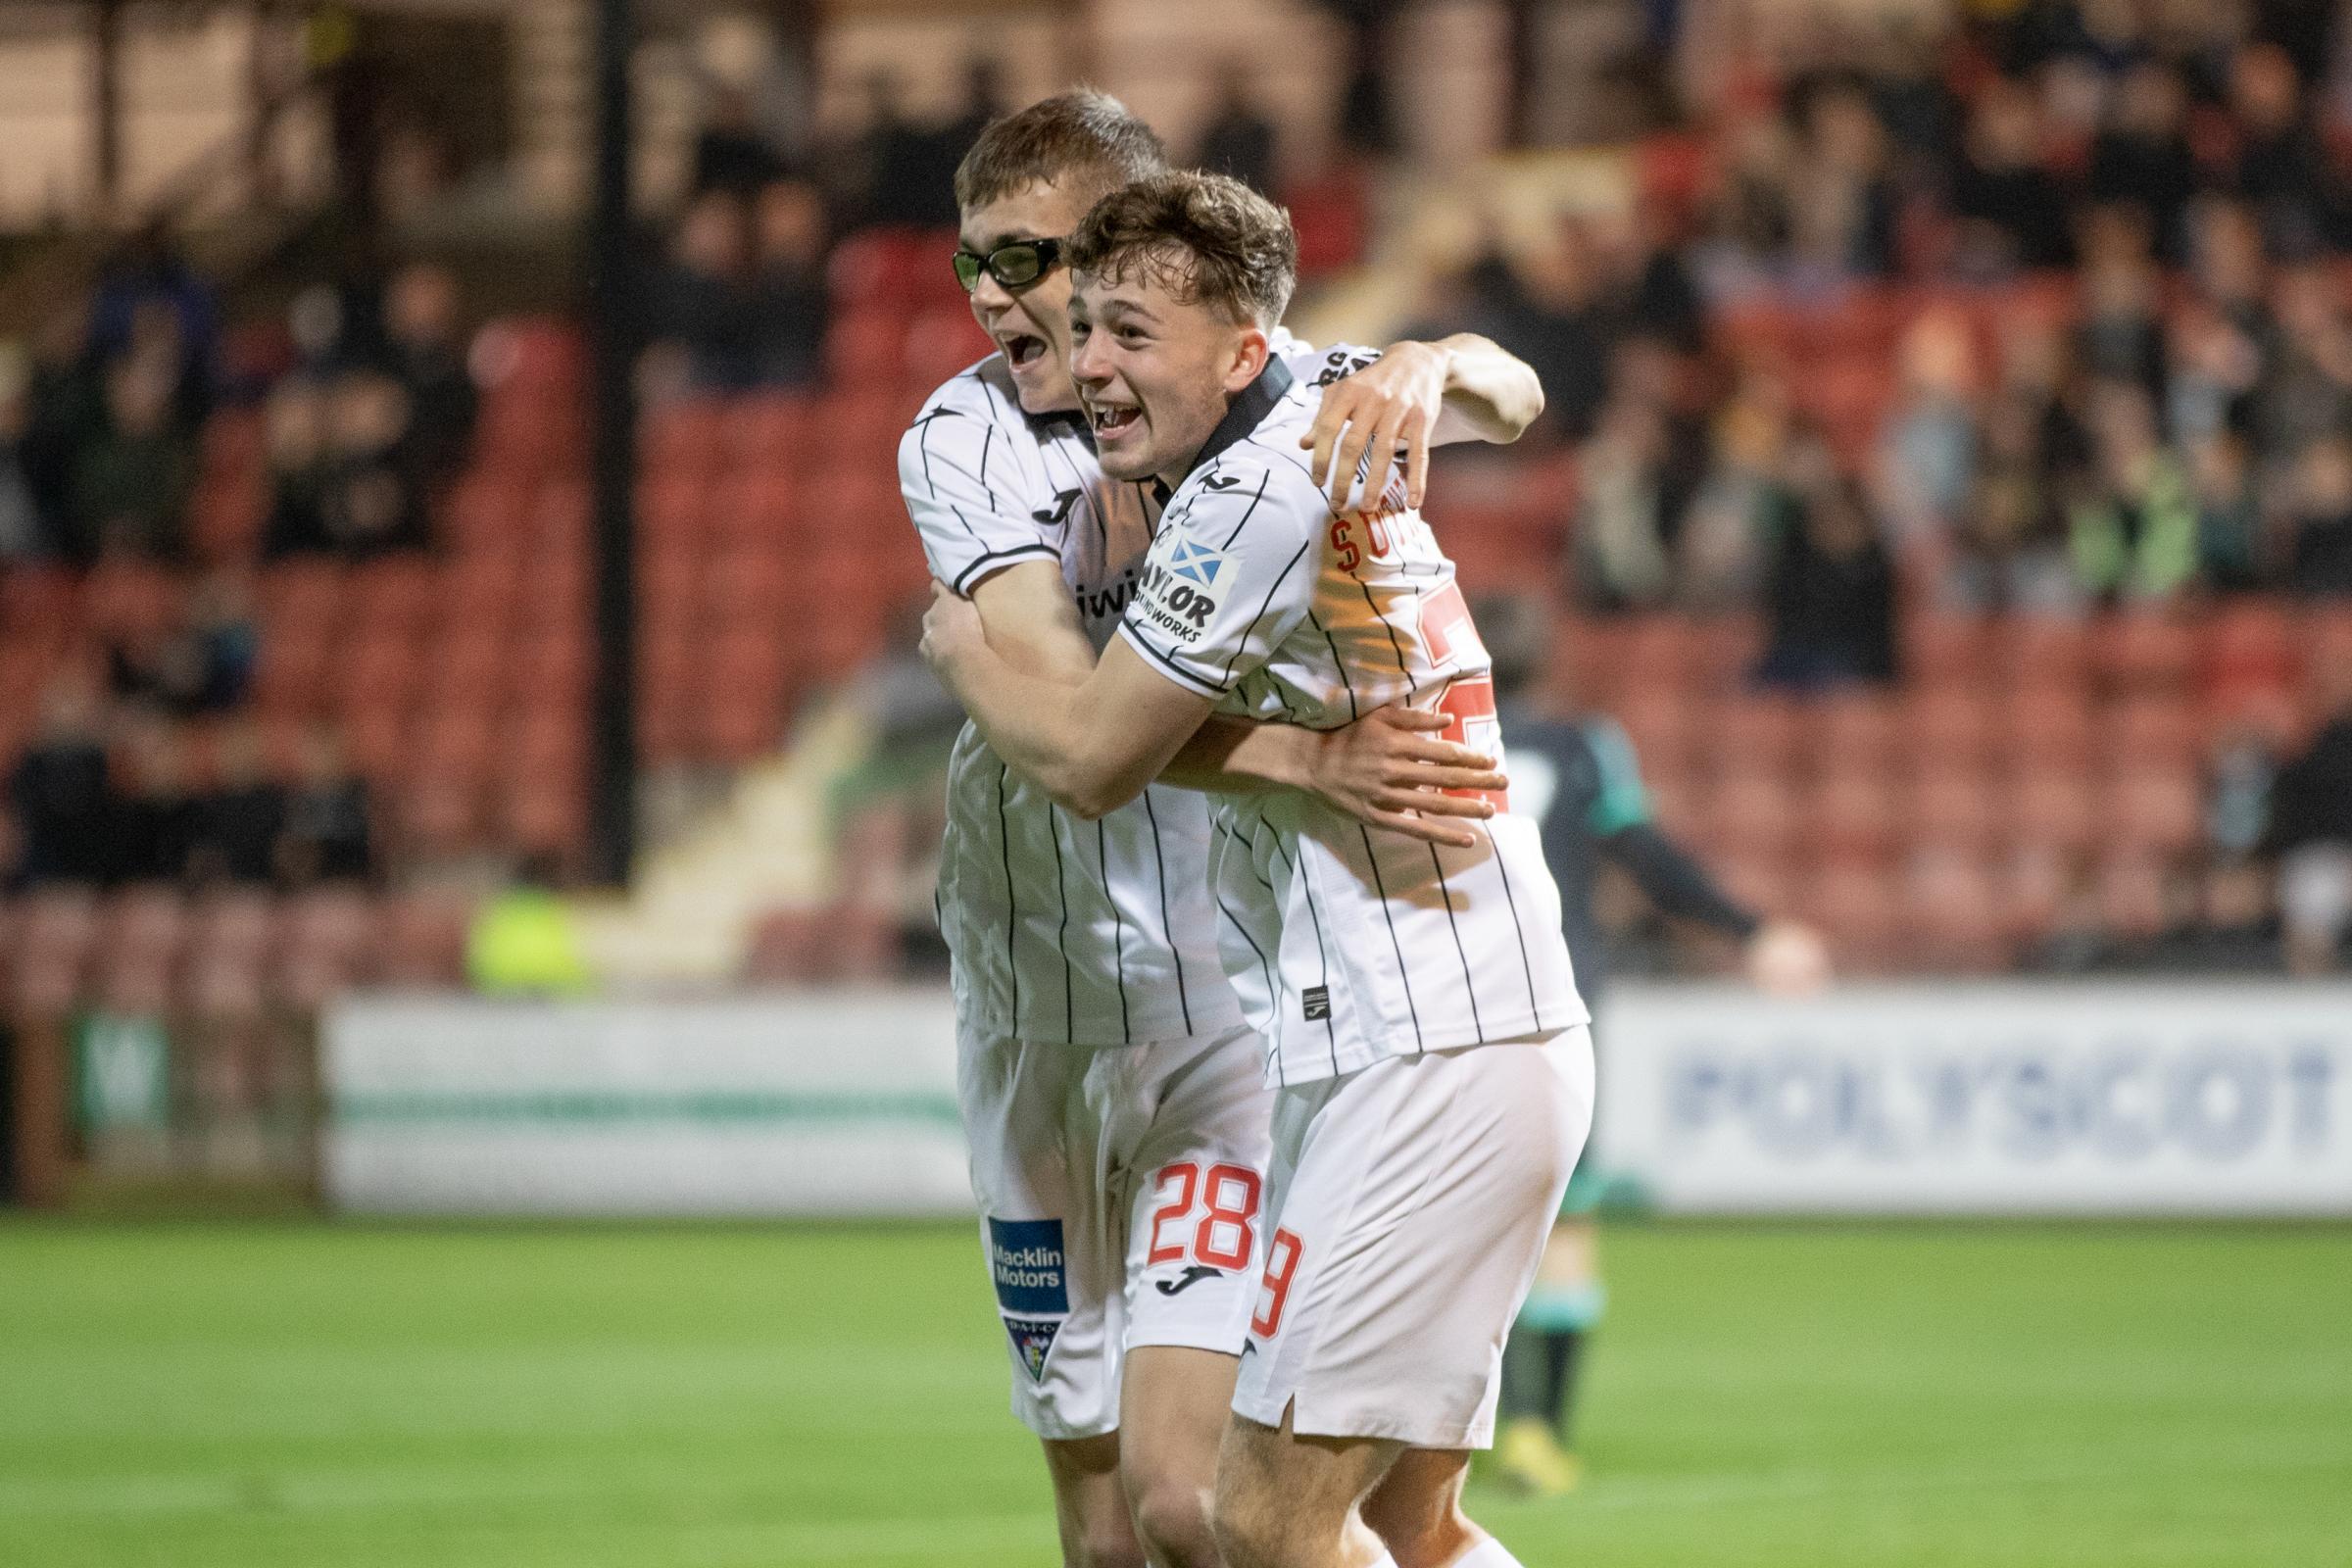 Dunfermline: James McPake on academy youngsters after cup success